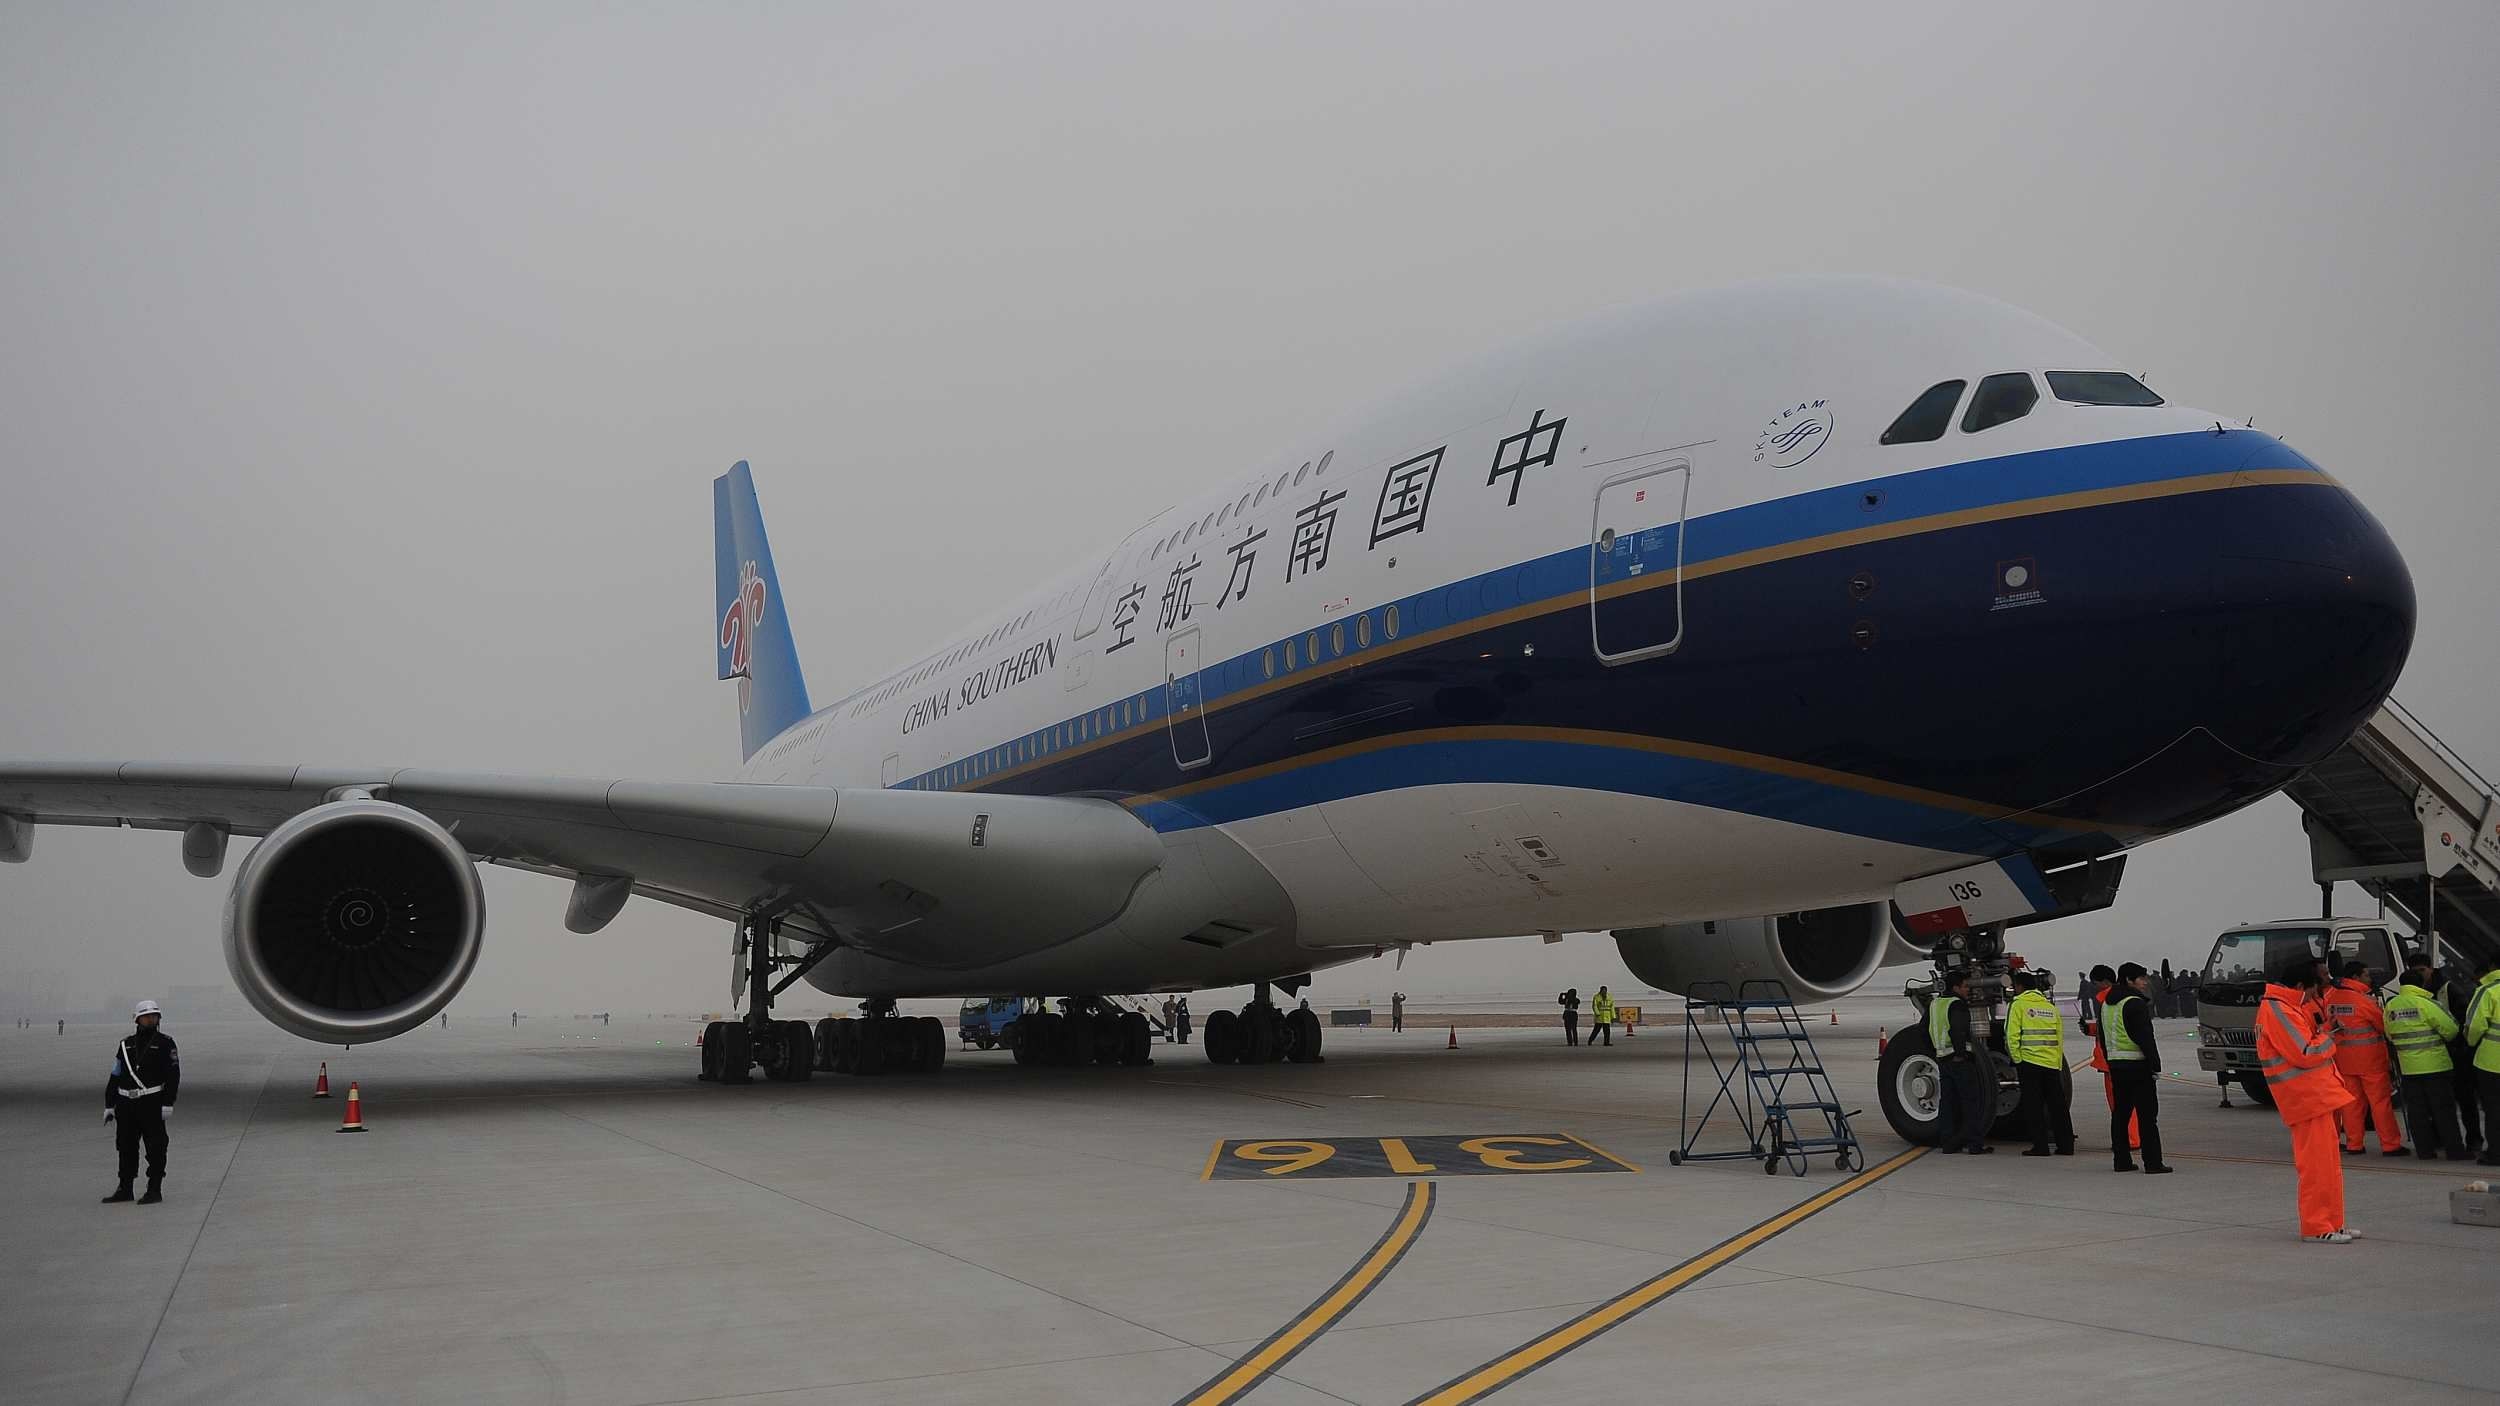 The Airbus A380 in full China Southern livery. [Photo: VCG]